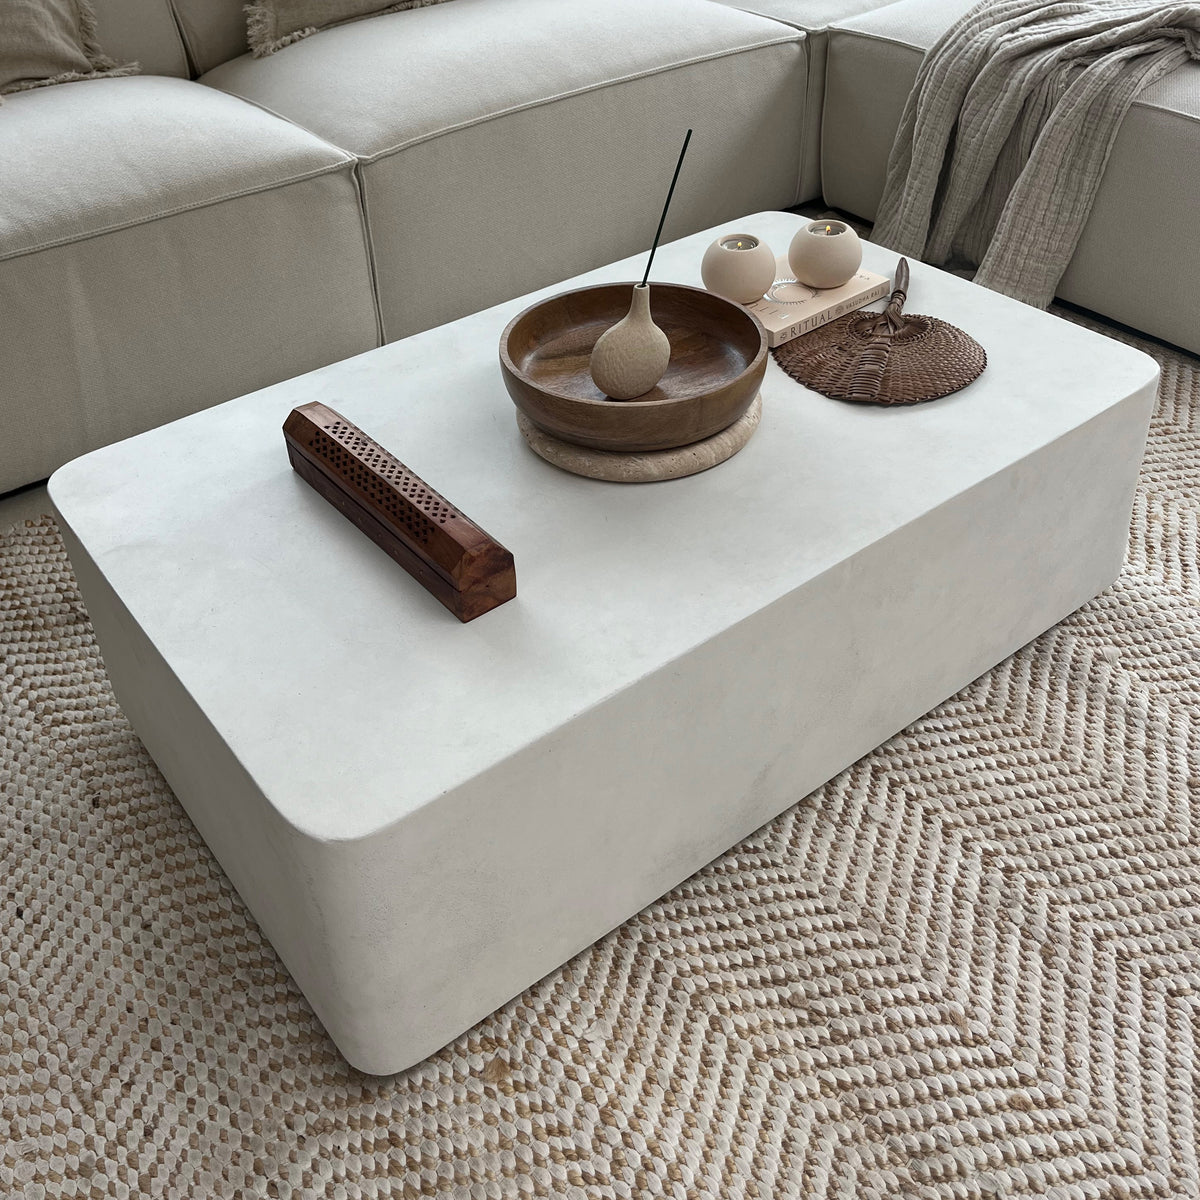 Minimal Concrete Rectangular Coffee Table Large adorned with wooden accessories